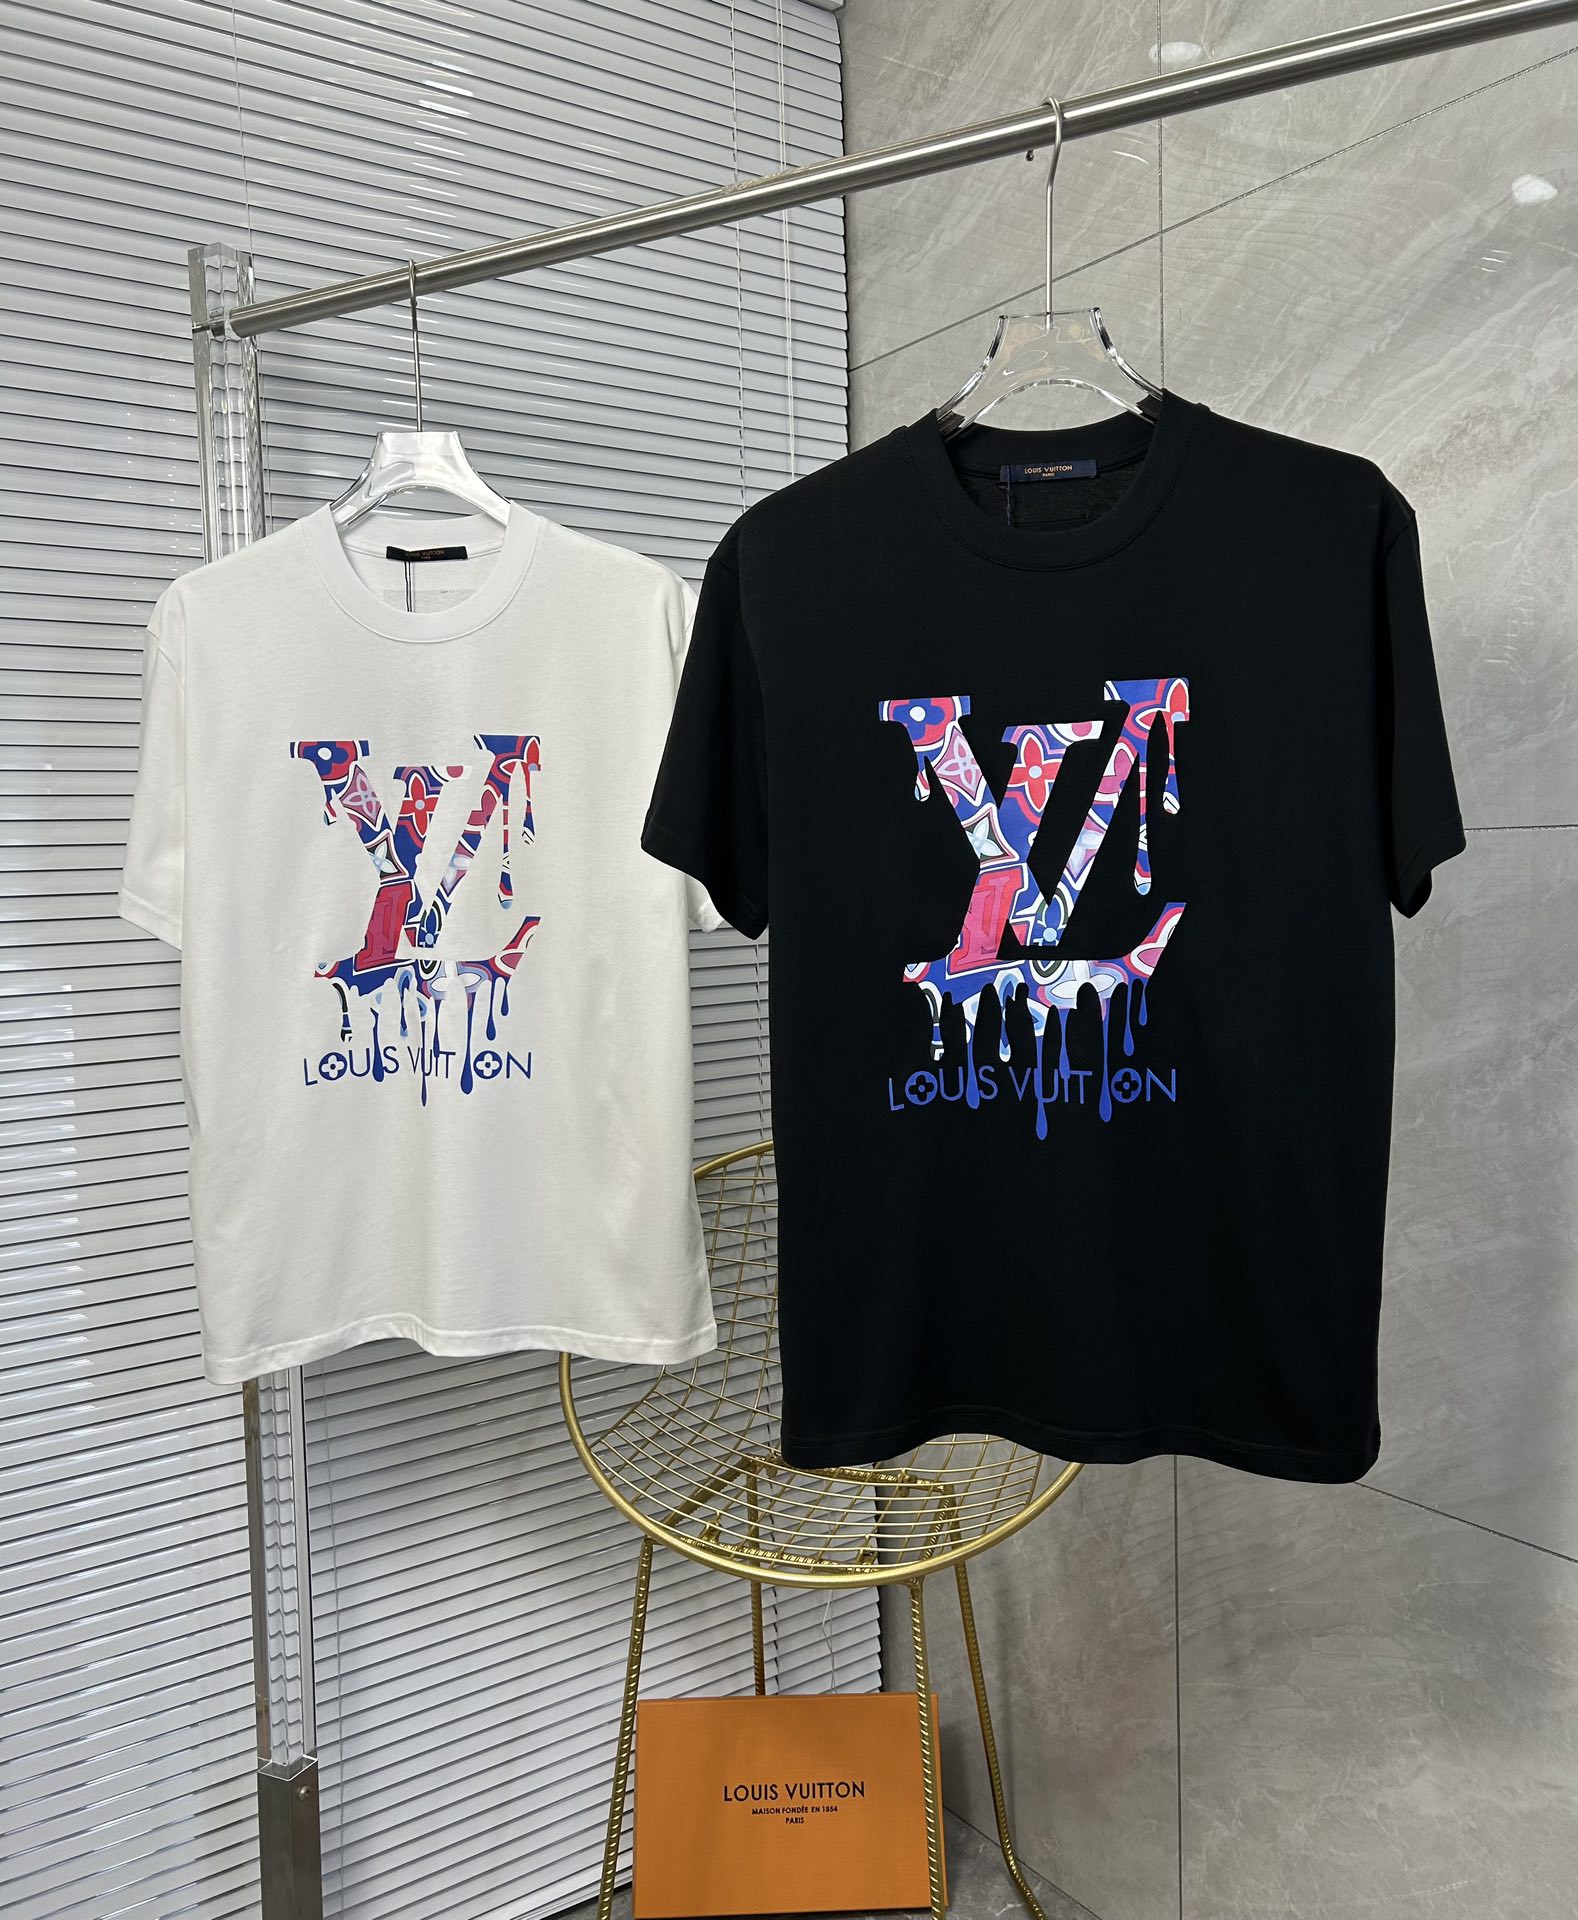 Louis Vuitton Clothing T-Shirt Black White Printing Unisex Spring/Summer Collection Fashion Short Sleeve